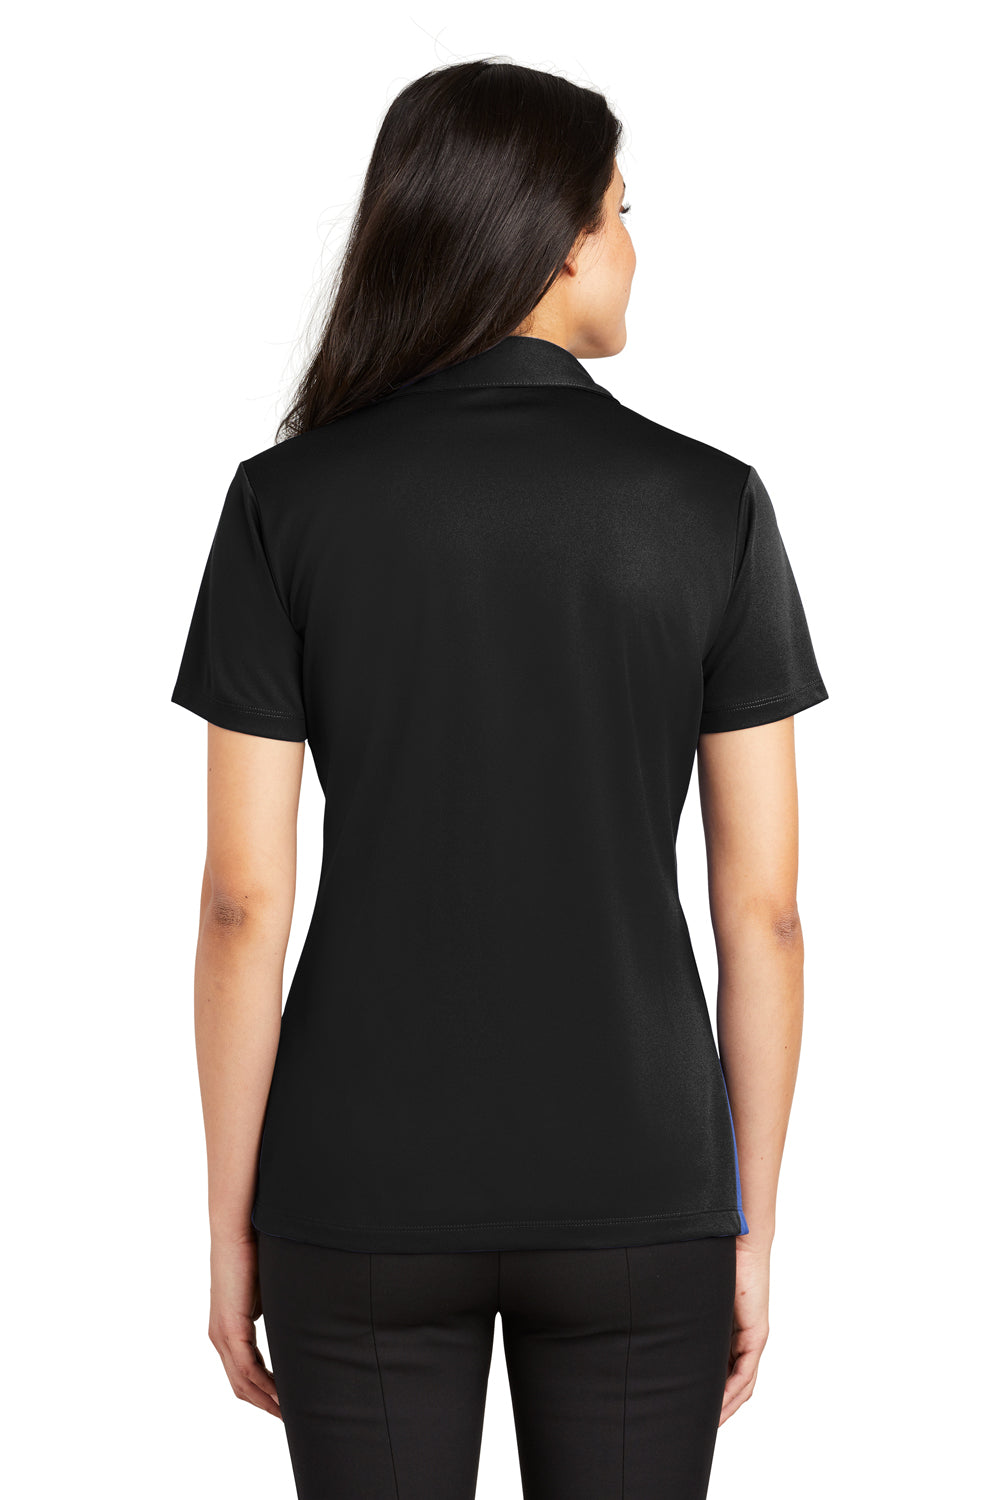 Port Authority L540 Womens Silk Touch Performance Moisture Wicking Short Sleeve Polo Shirt Black Back